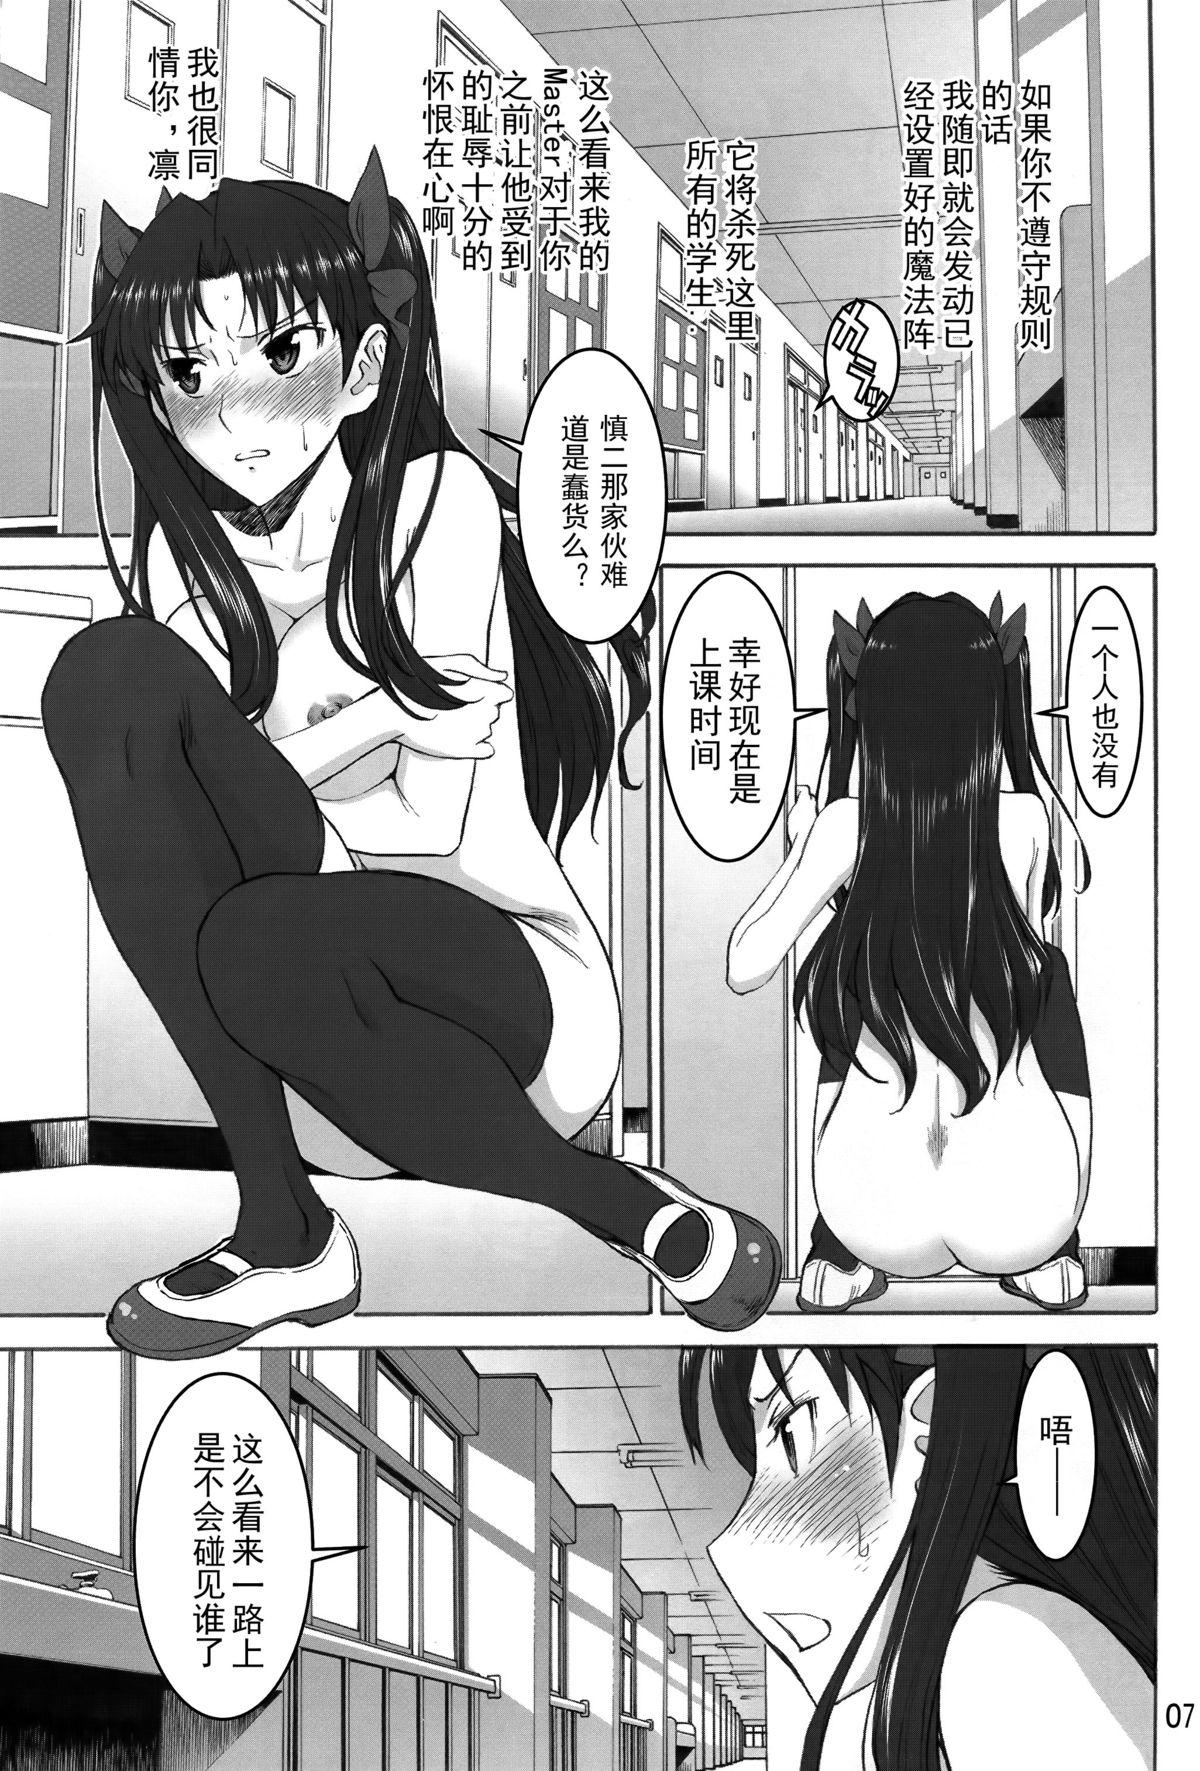 Strapon Rinkan Mahou - Fate stay night Scandal - Page 7